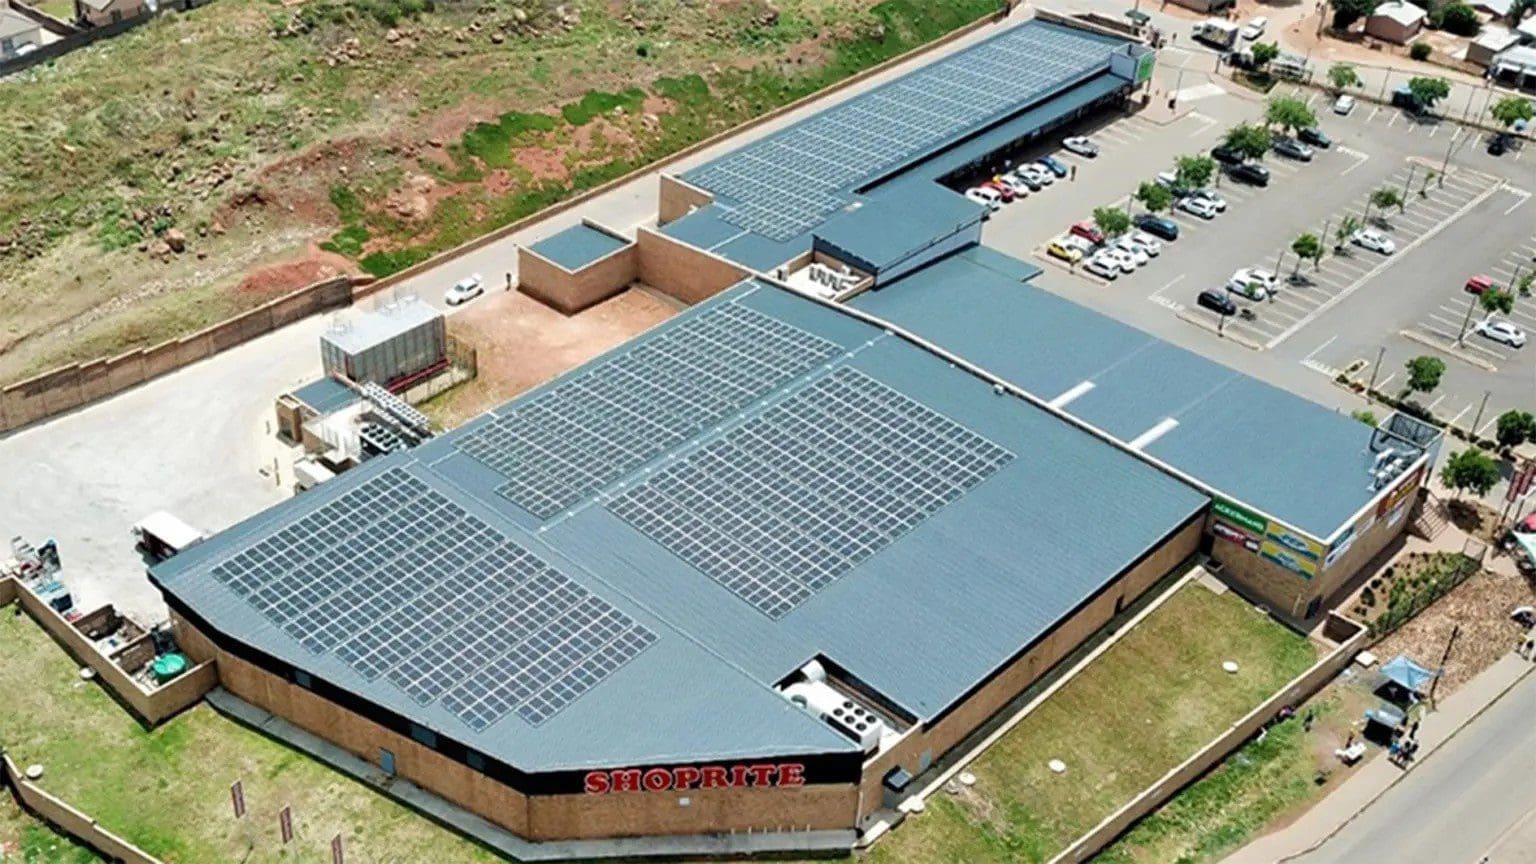 Shoprite doubles solar capacity, aims to power 25% of operations with renewable energy in five years